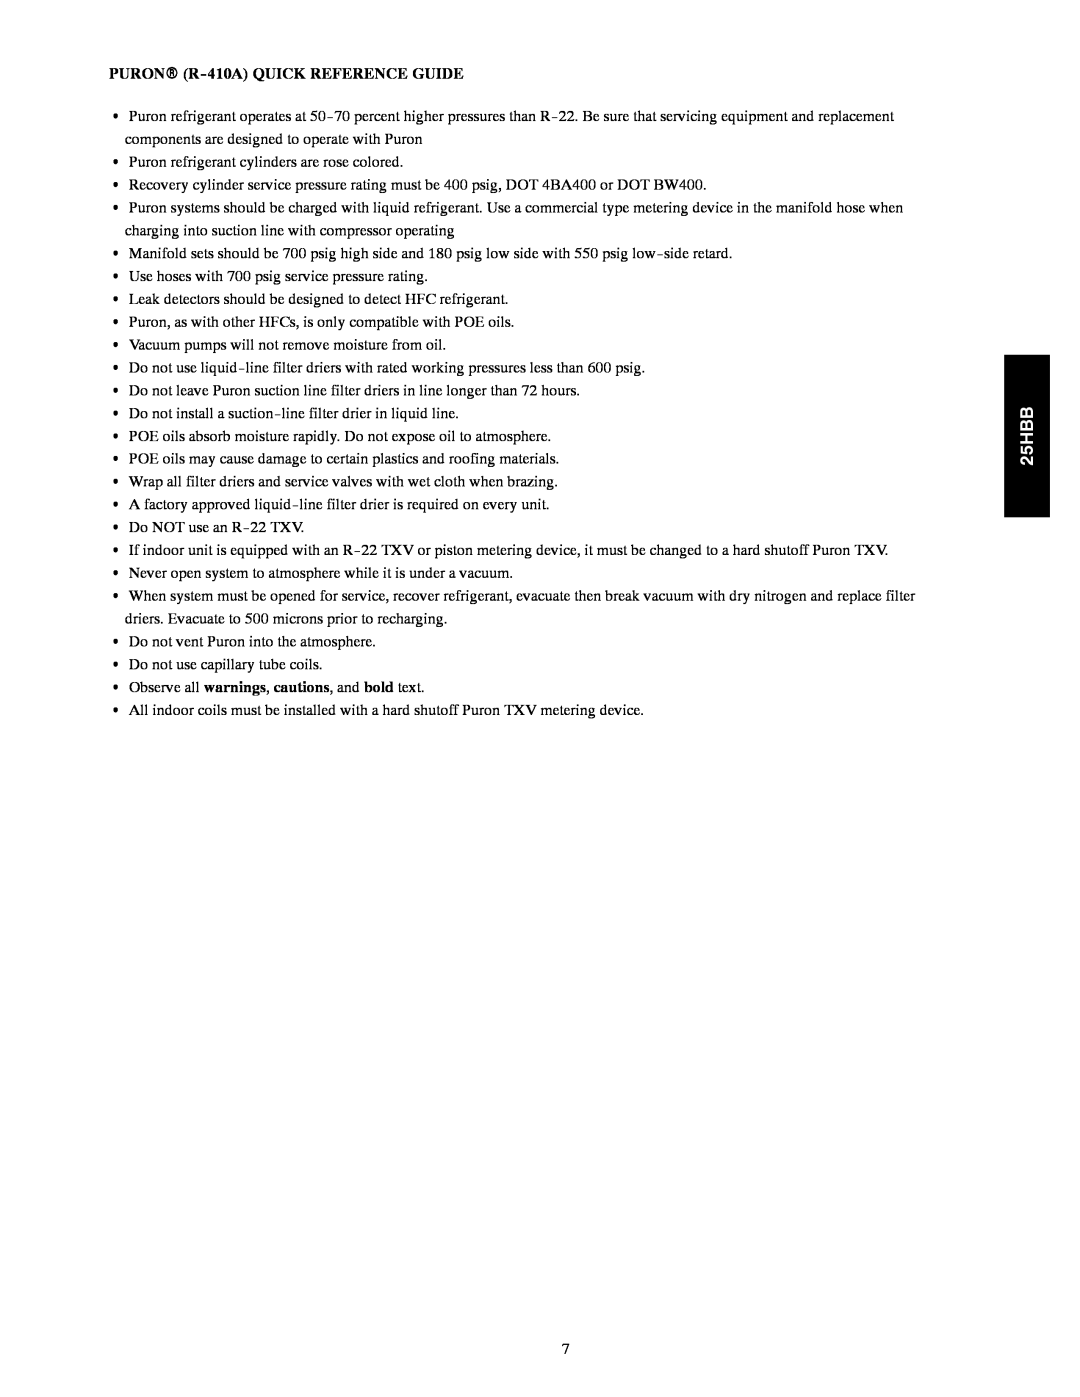 Carrier 25HBB installation instructions PURONR R-410AQUICK REFERENCE GUIDE 